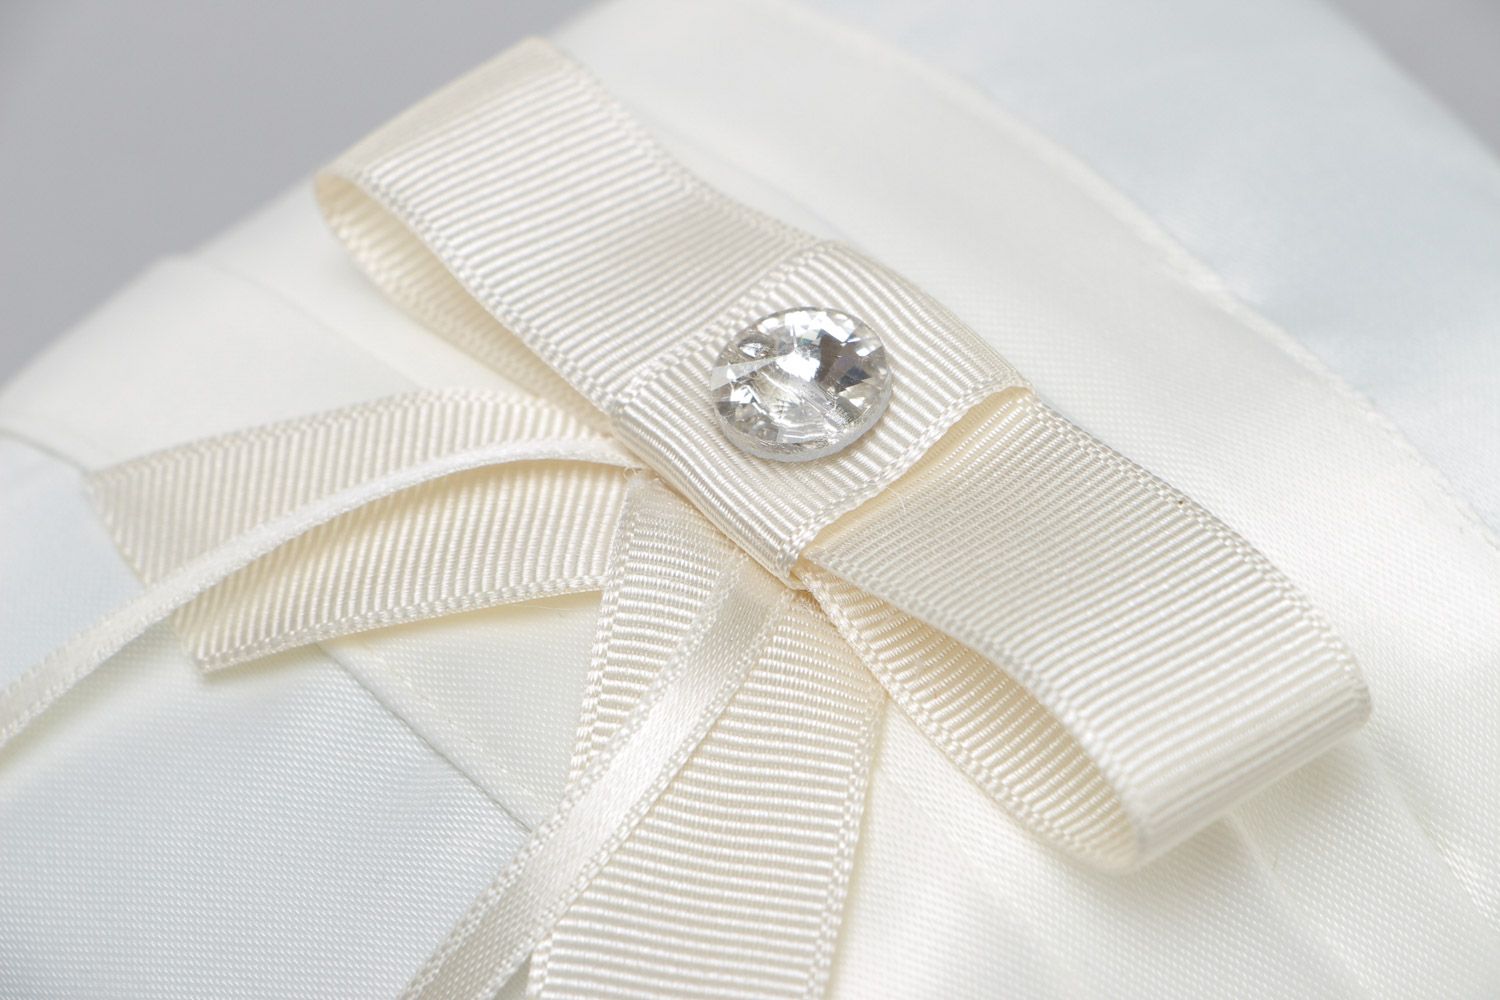 Tender handmade wedding ring pillow sewn of ivory-colored satin fabric with bow photo 4